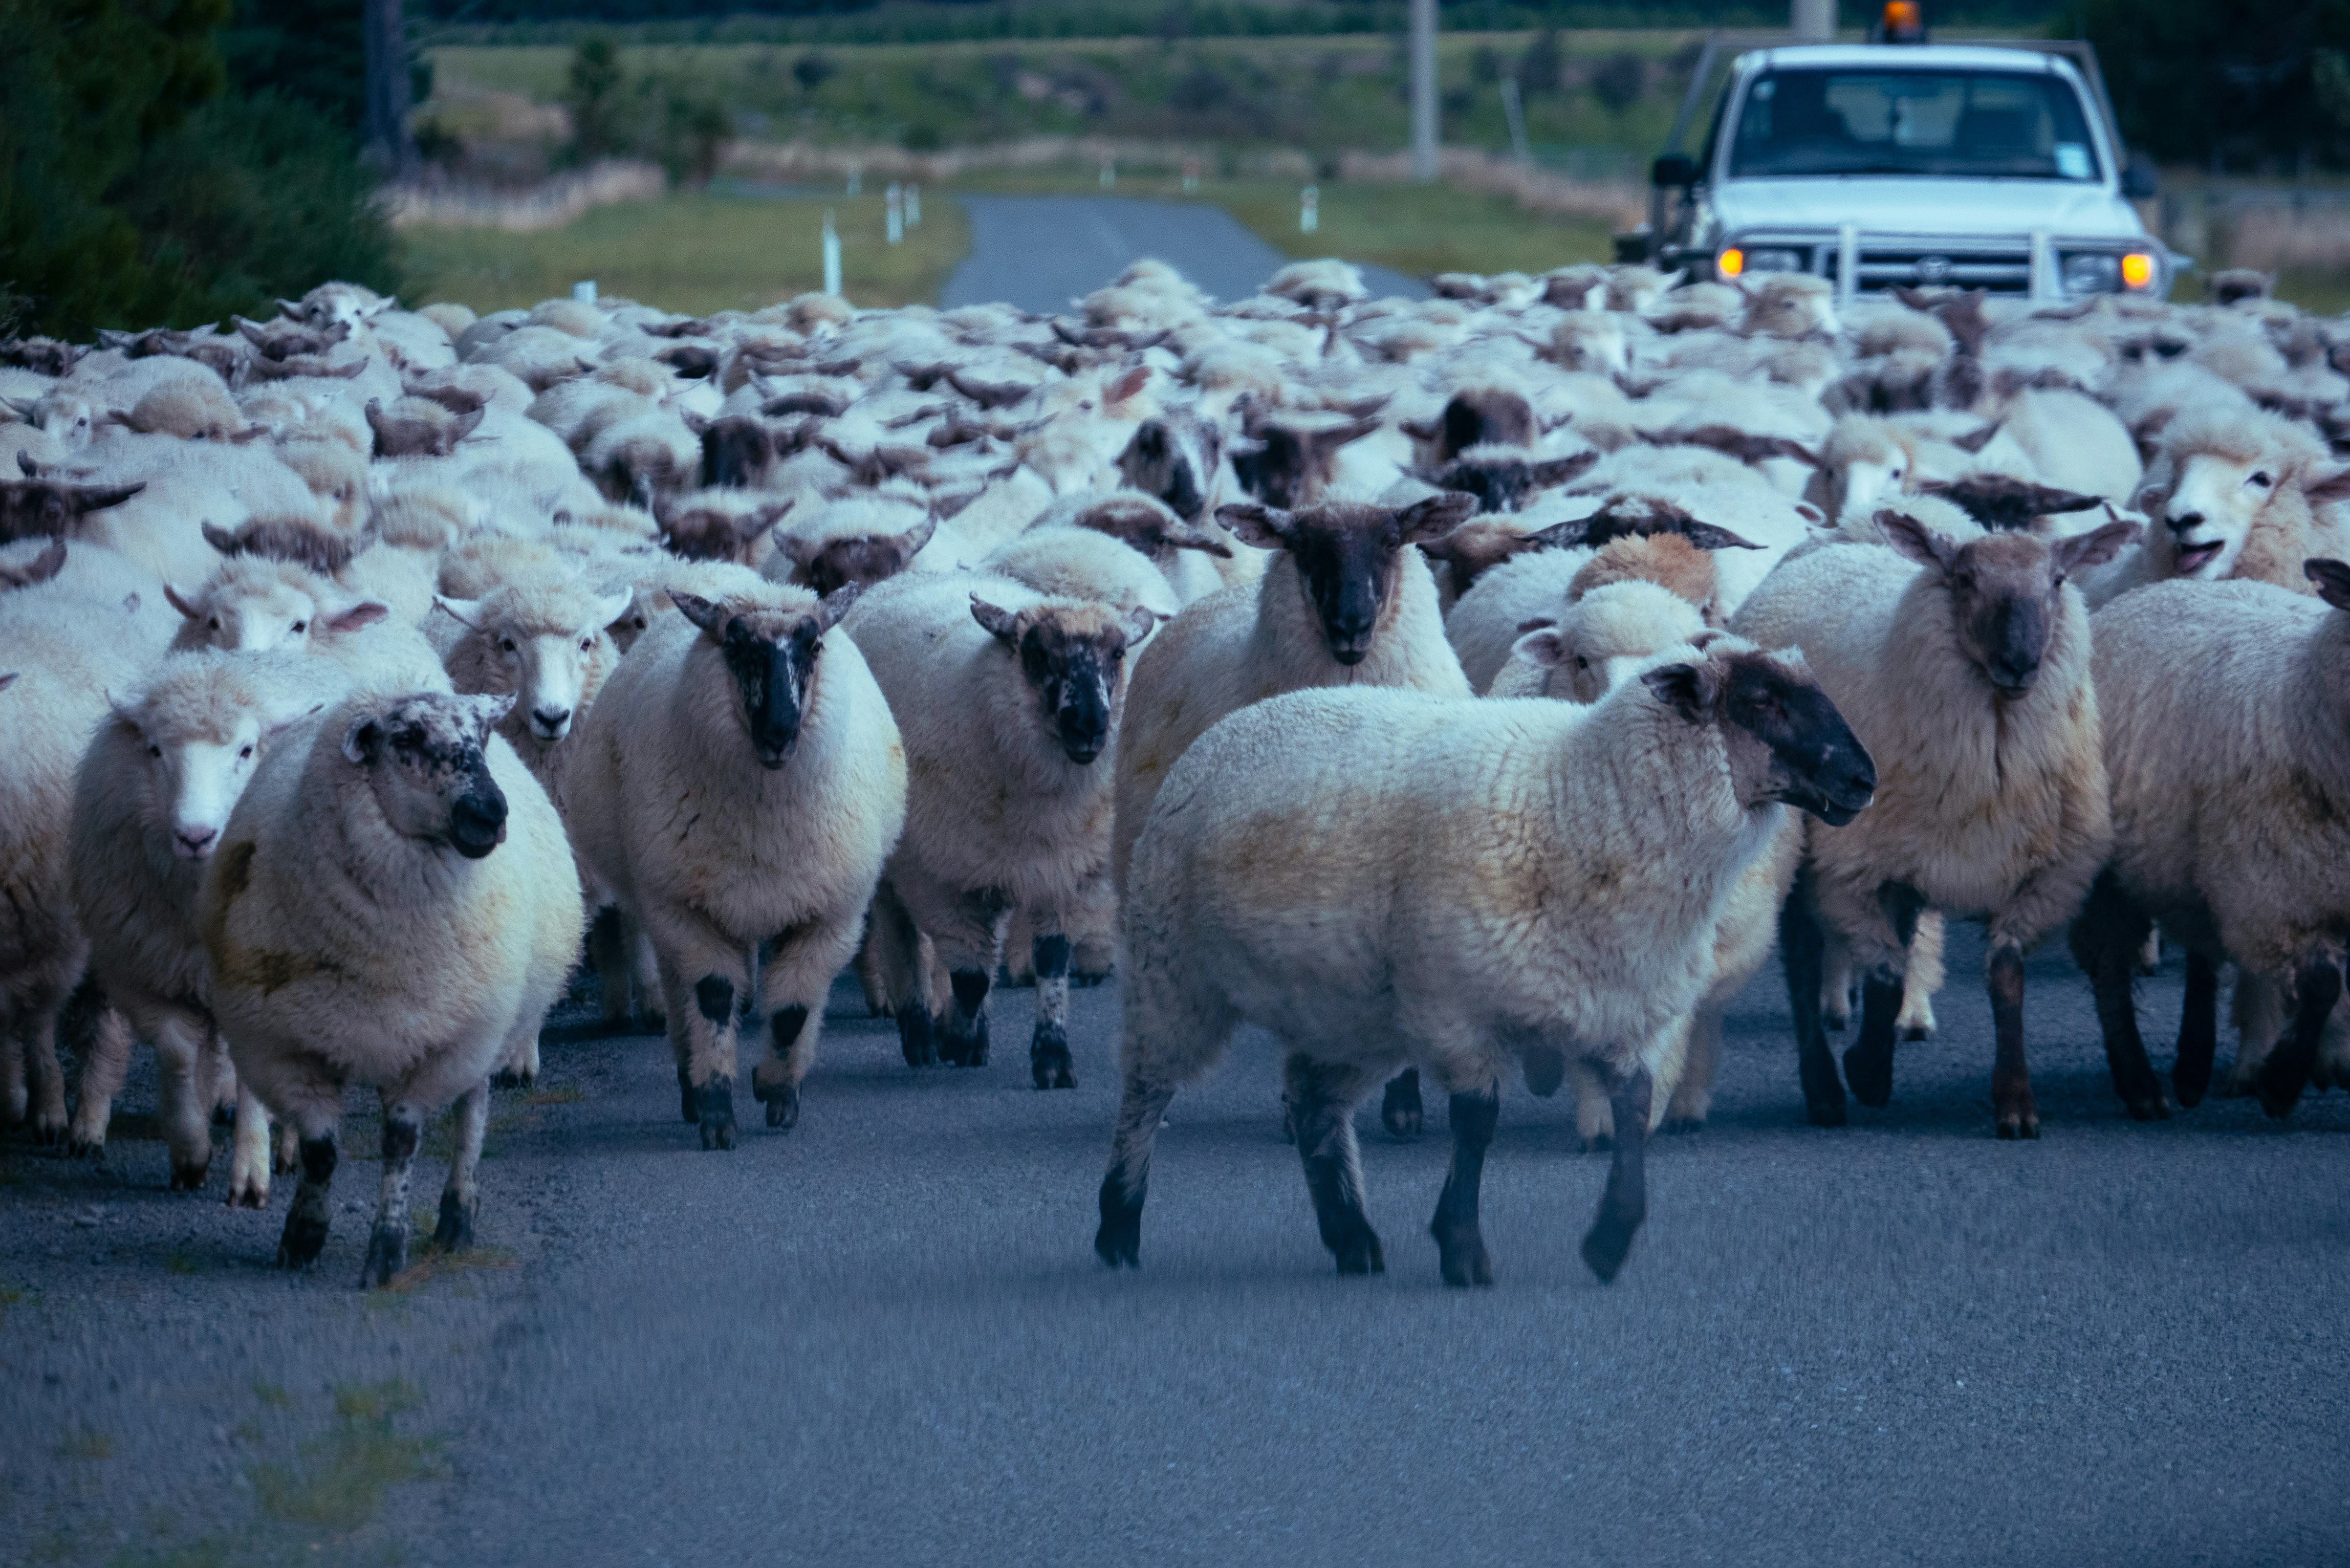 Went on holiday, got road blocked by sheep, pretty normal here in NZ